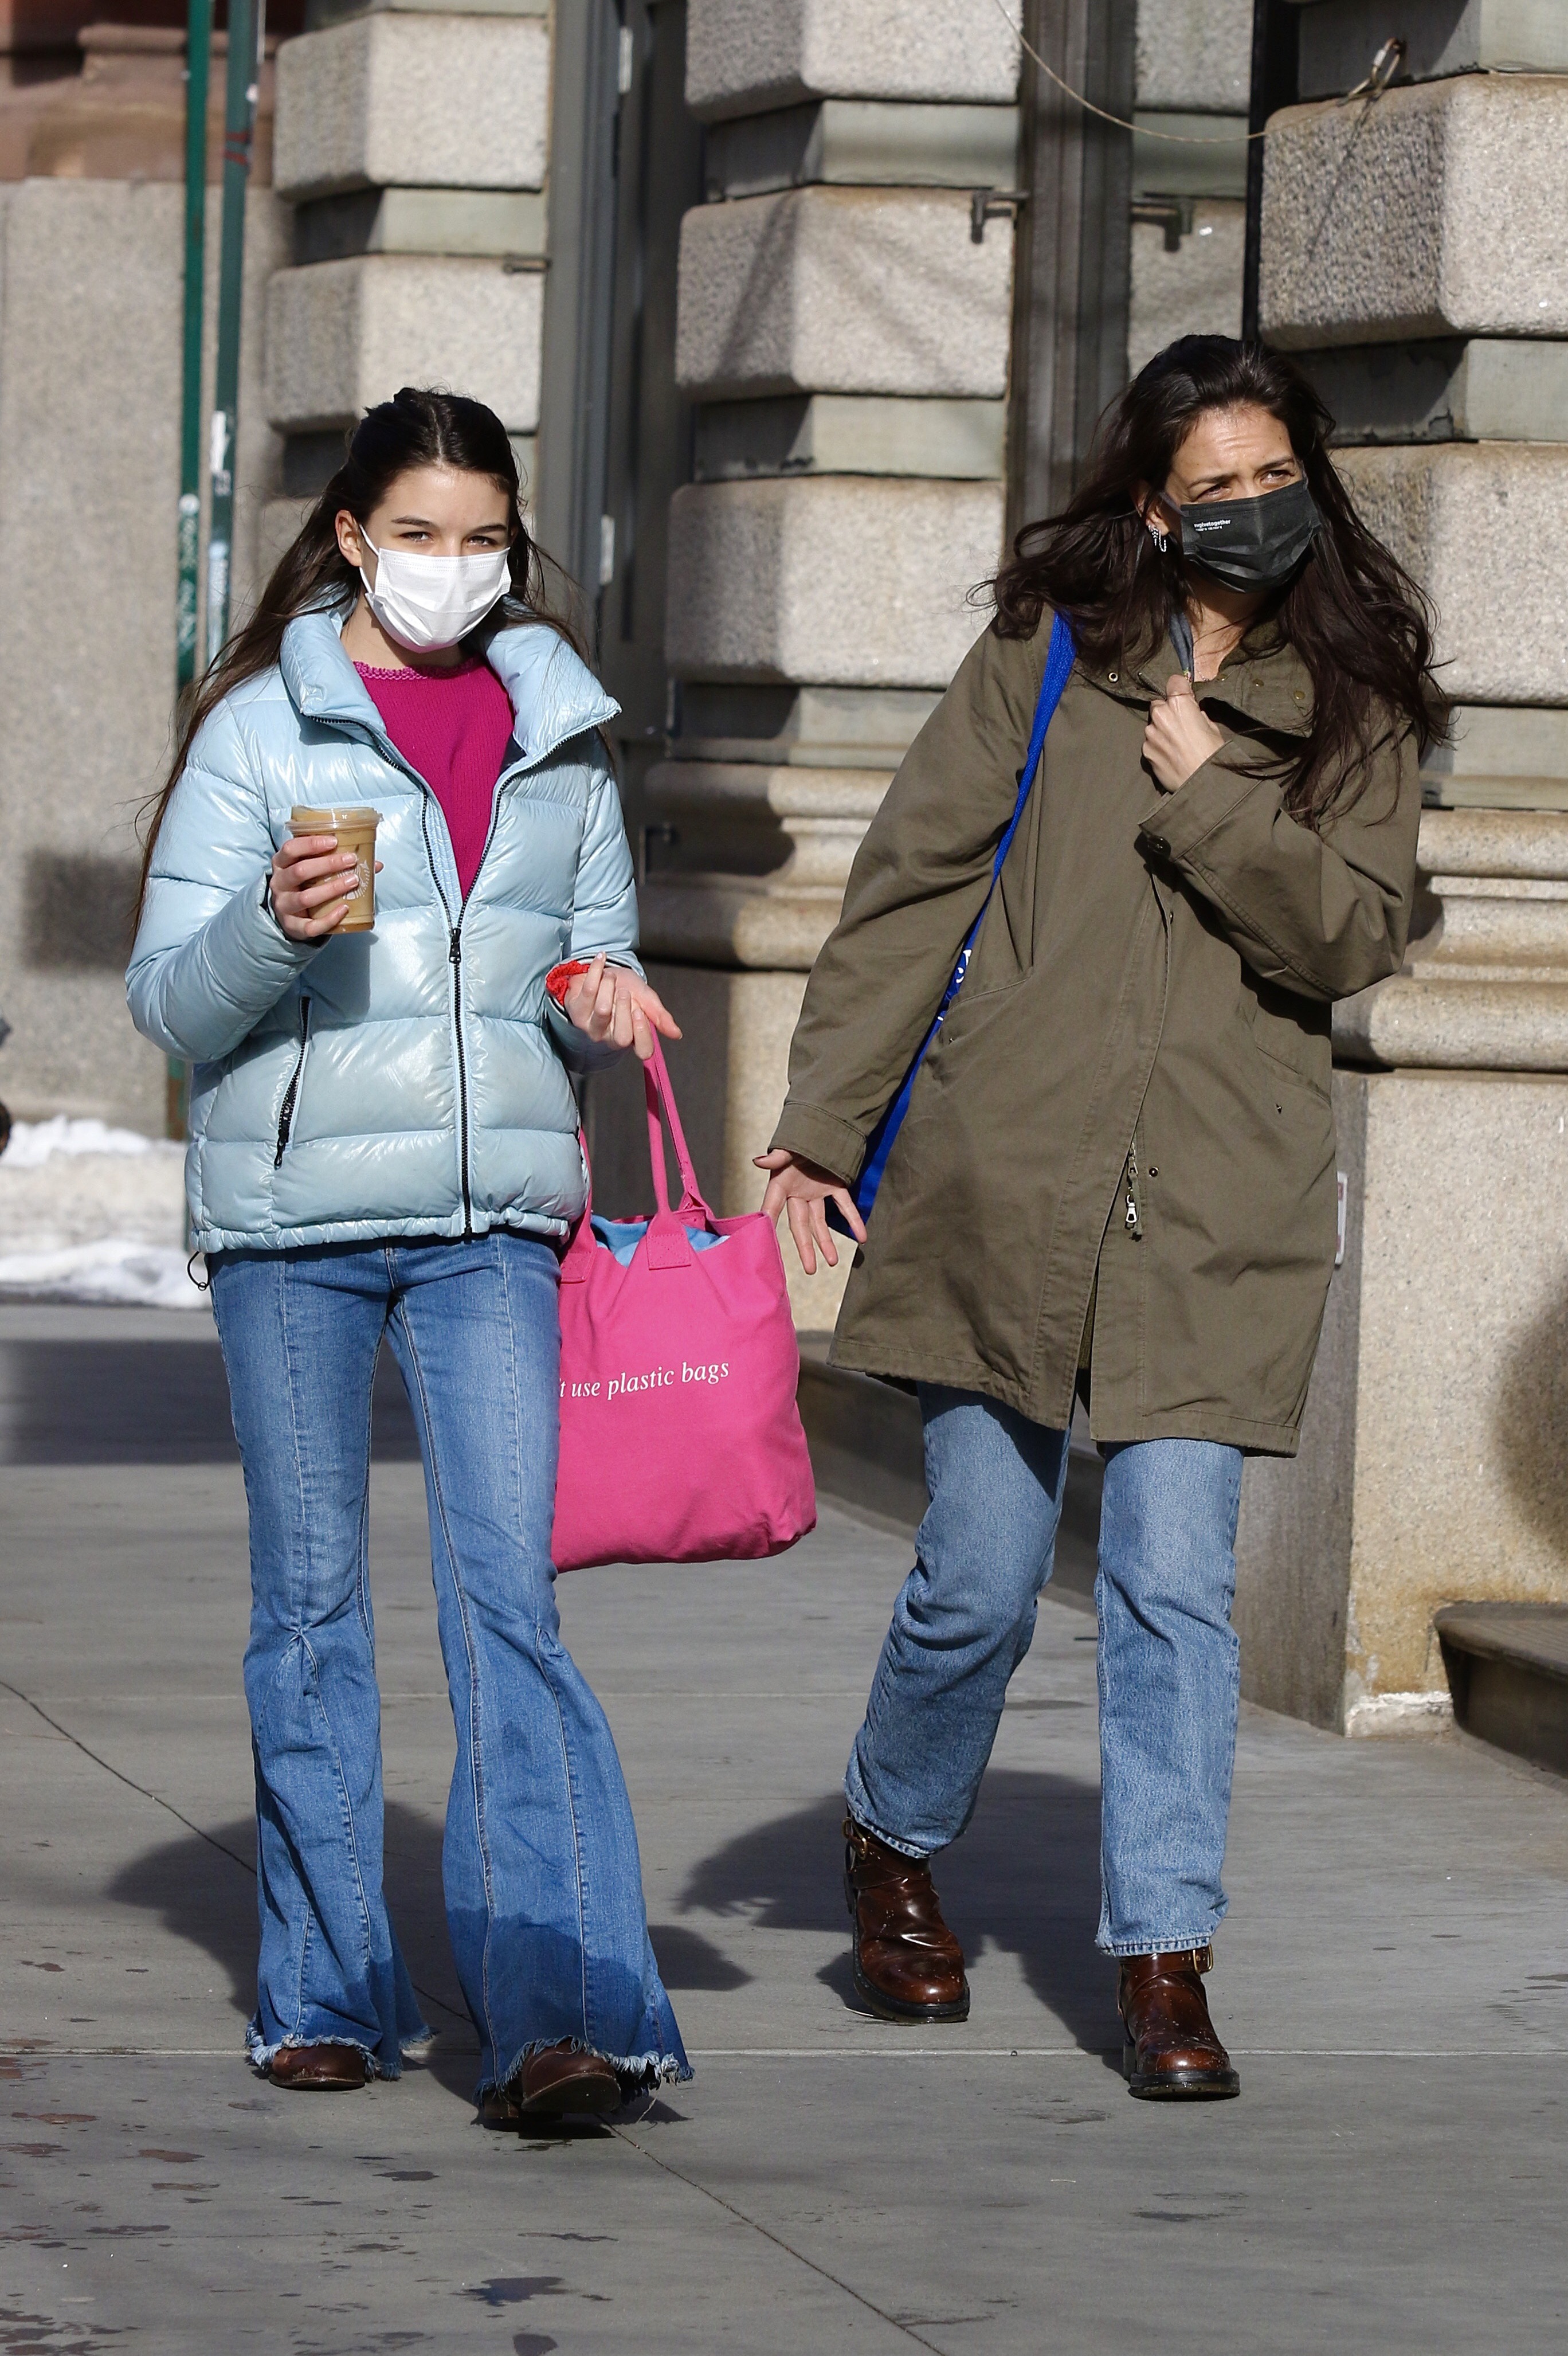 Suri Cruise and Katie Holmes spotted out in New York City on February 6, 2021 | Source: Getty Images